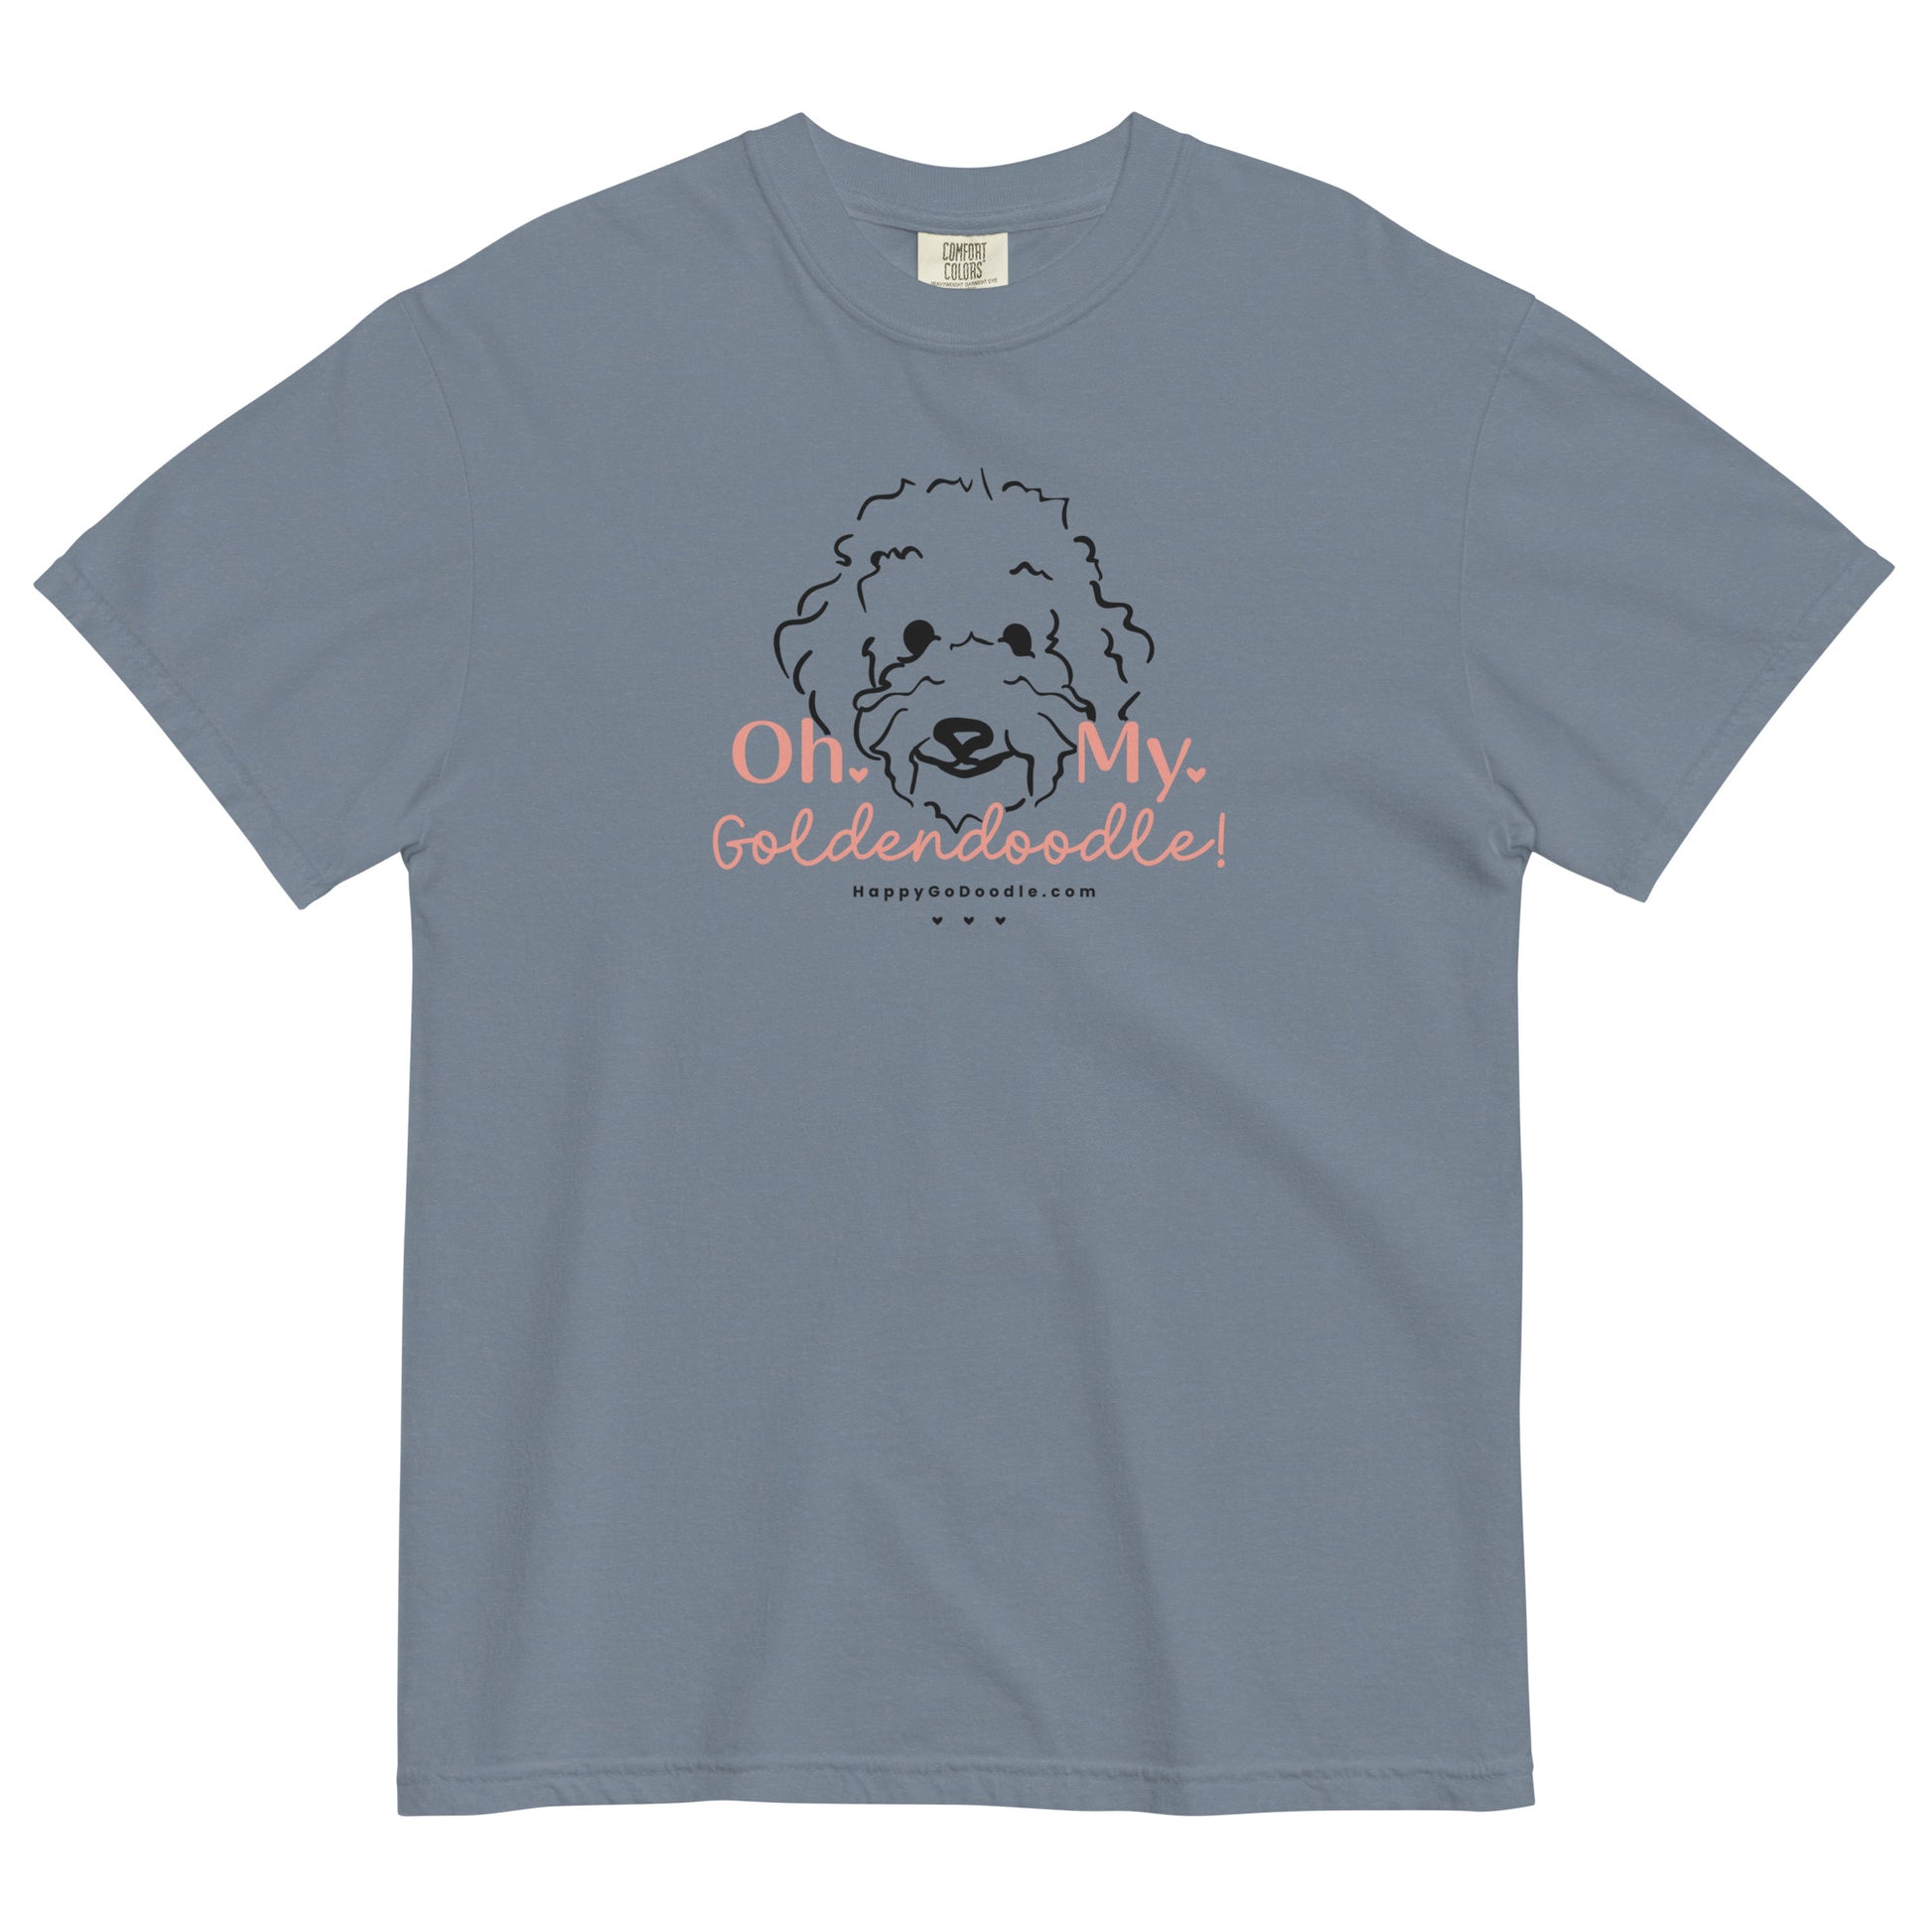 Goldendoodle comfort colors t-shirt with Goldendoodle dog face and words "Oh My Goldendoodle" in blue jean color